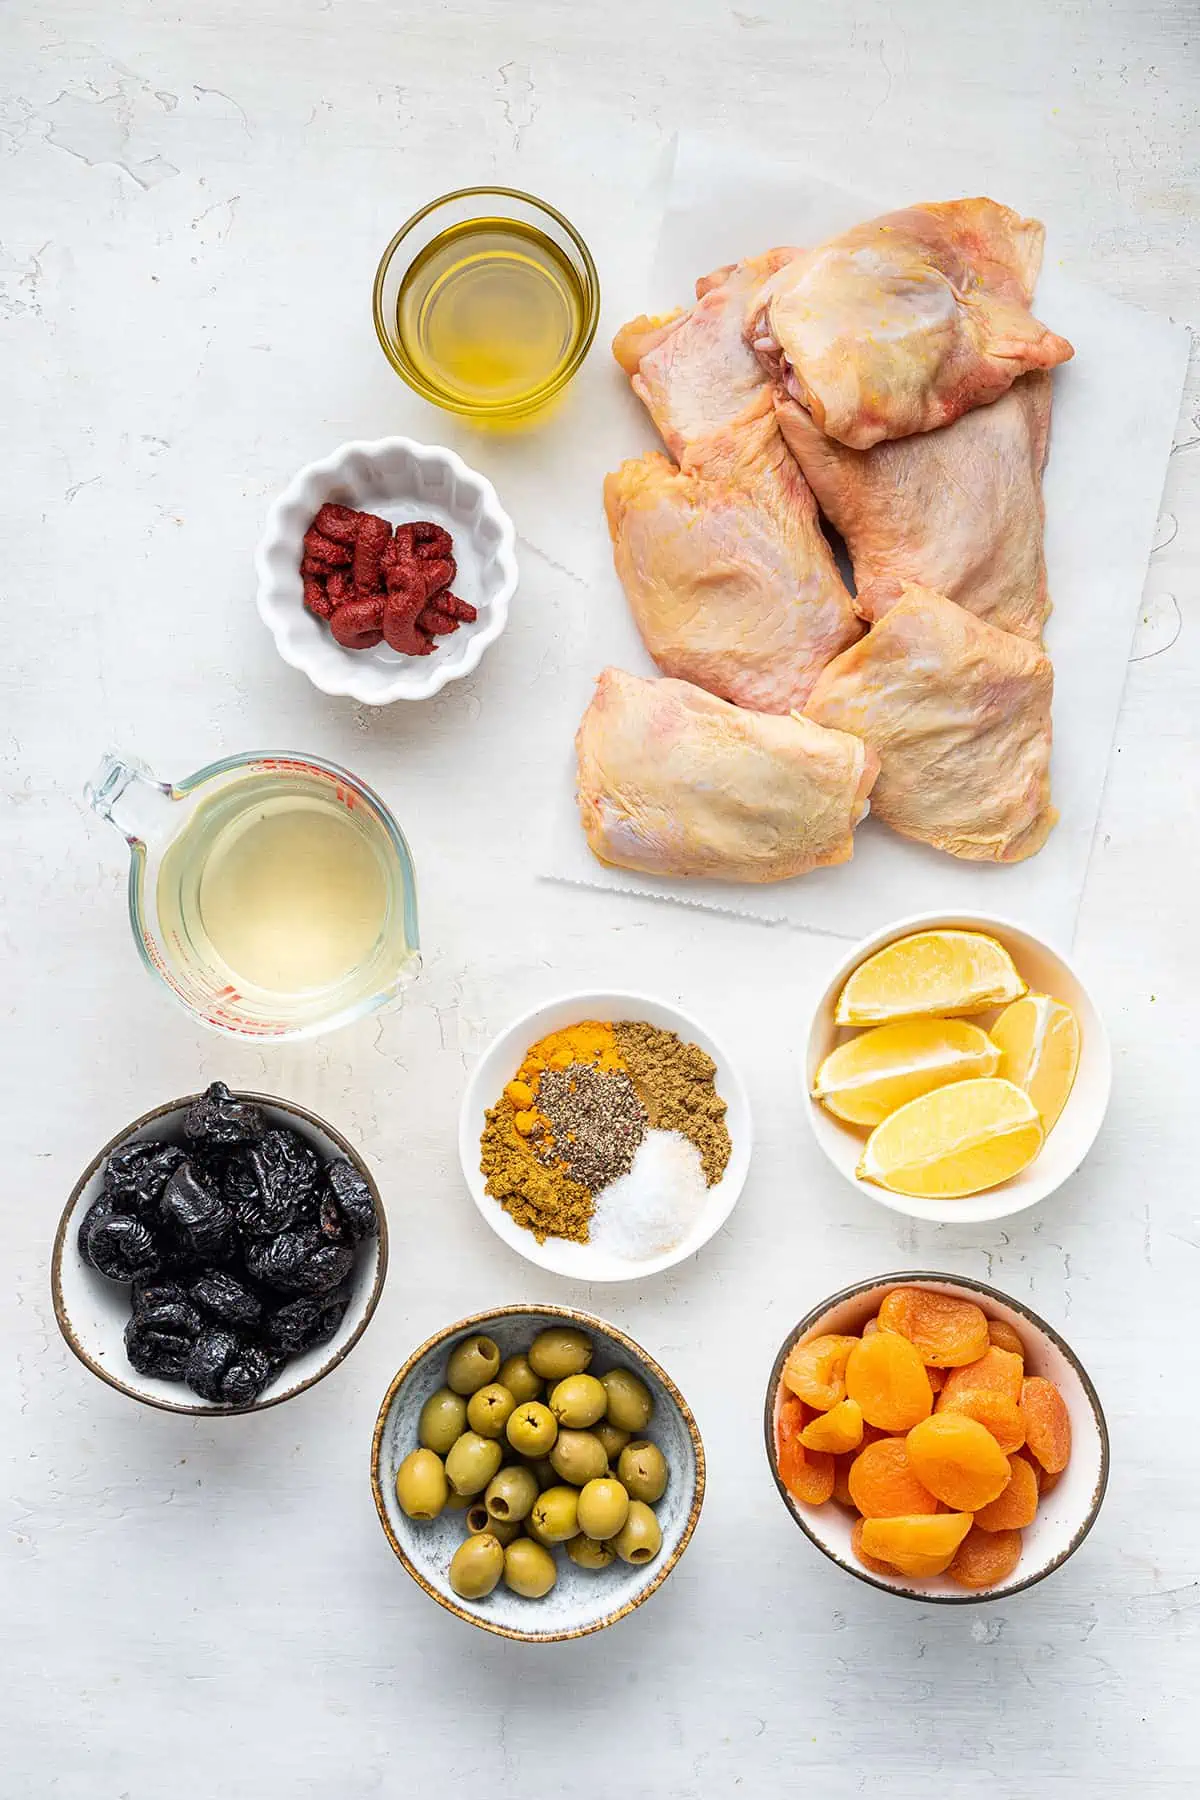 Overhead view of the ingredients needed for Moroccan chicken: skin-on chicken thighs, a bowl of olive oil, a bowl of tomato paste, a pyrex of white wine, a bowl of lemon slices, a bowl of spices, a bowl of dried apricots, a bowl of prunes, and a bowl of green olives